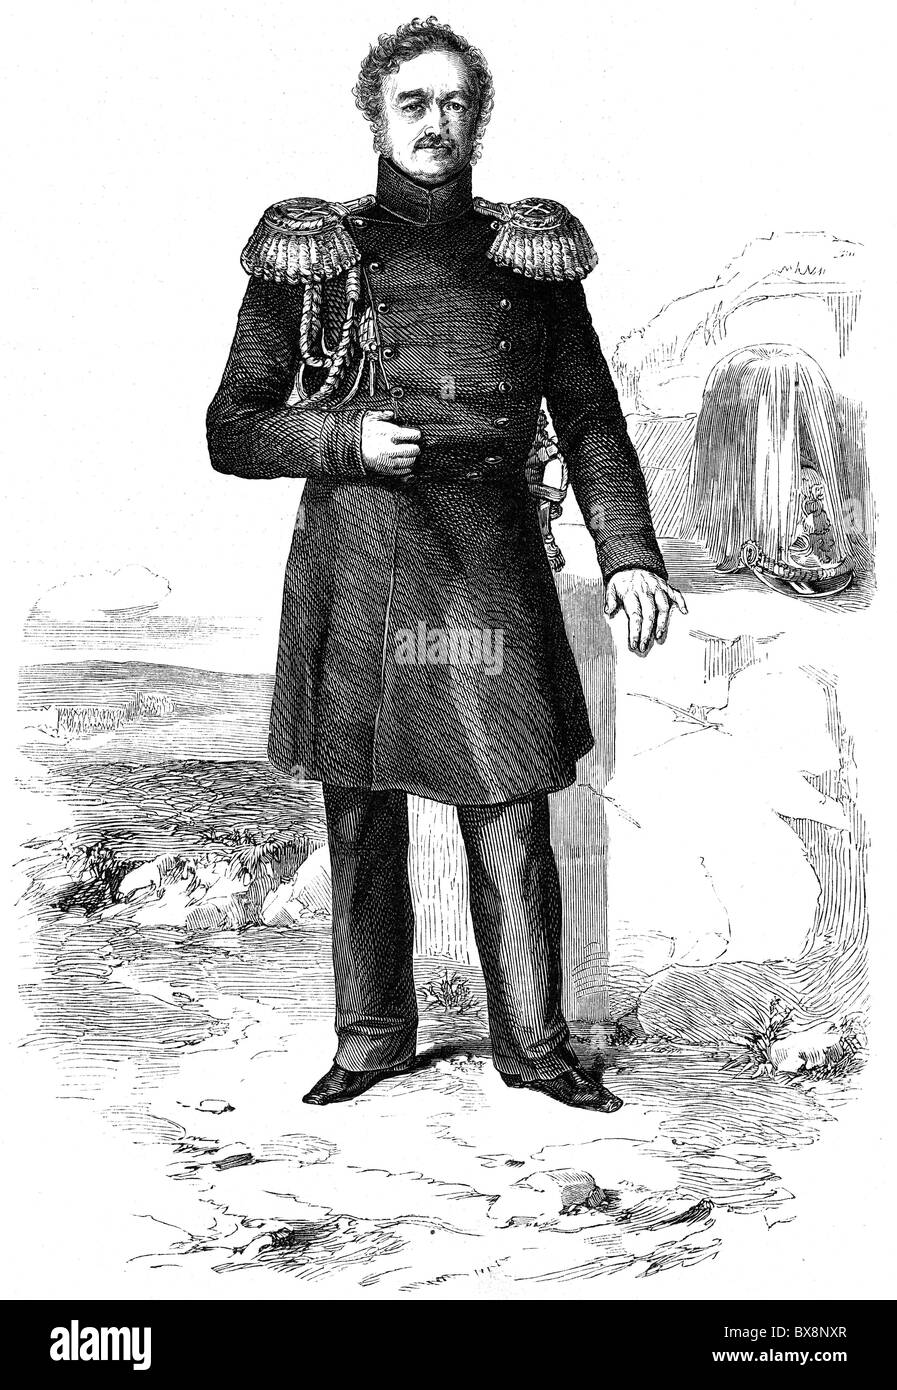 Paskevich, Ivan Fyodorovich, 19.5.1782 -  13.2.1856, Russian general, full length, wood engraving, published in 1854, Stock Photo